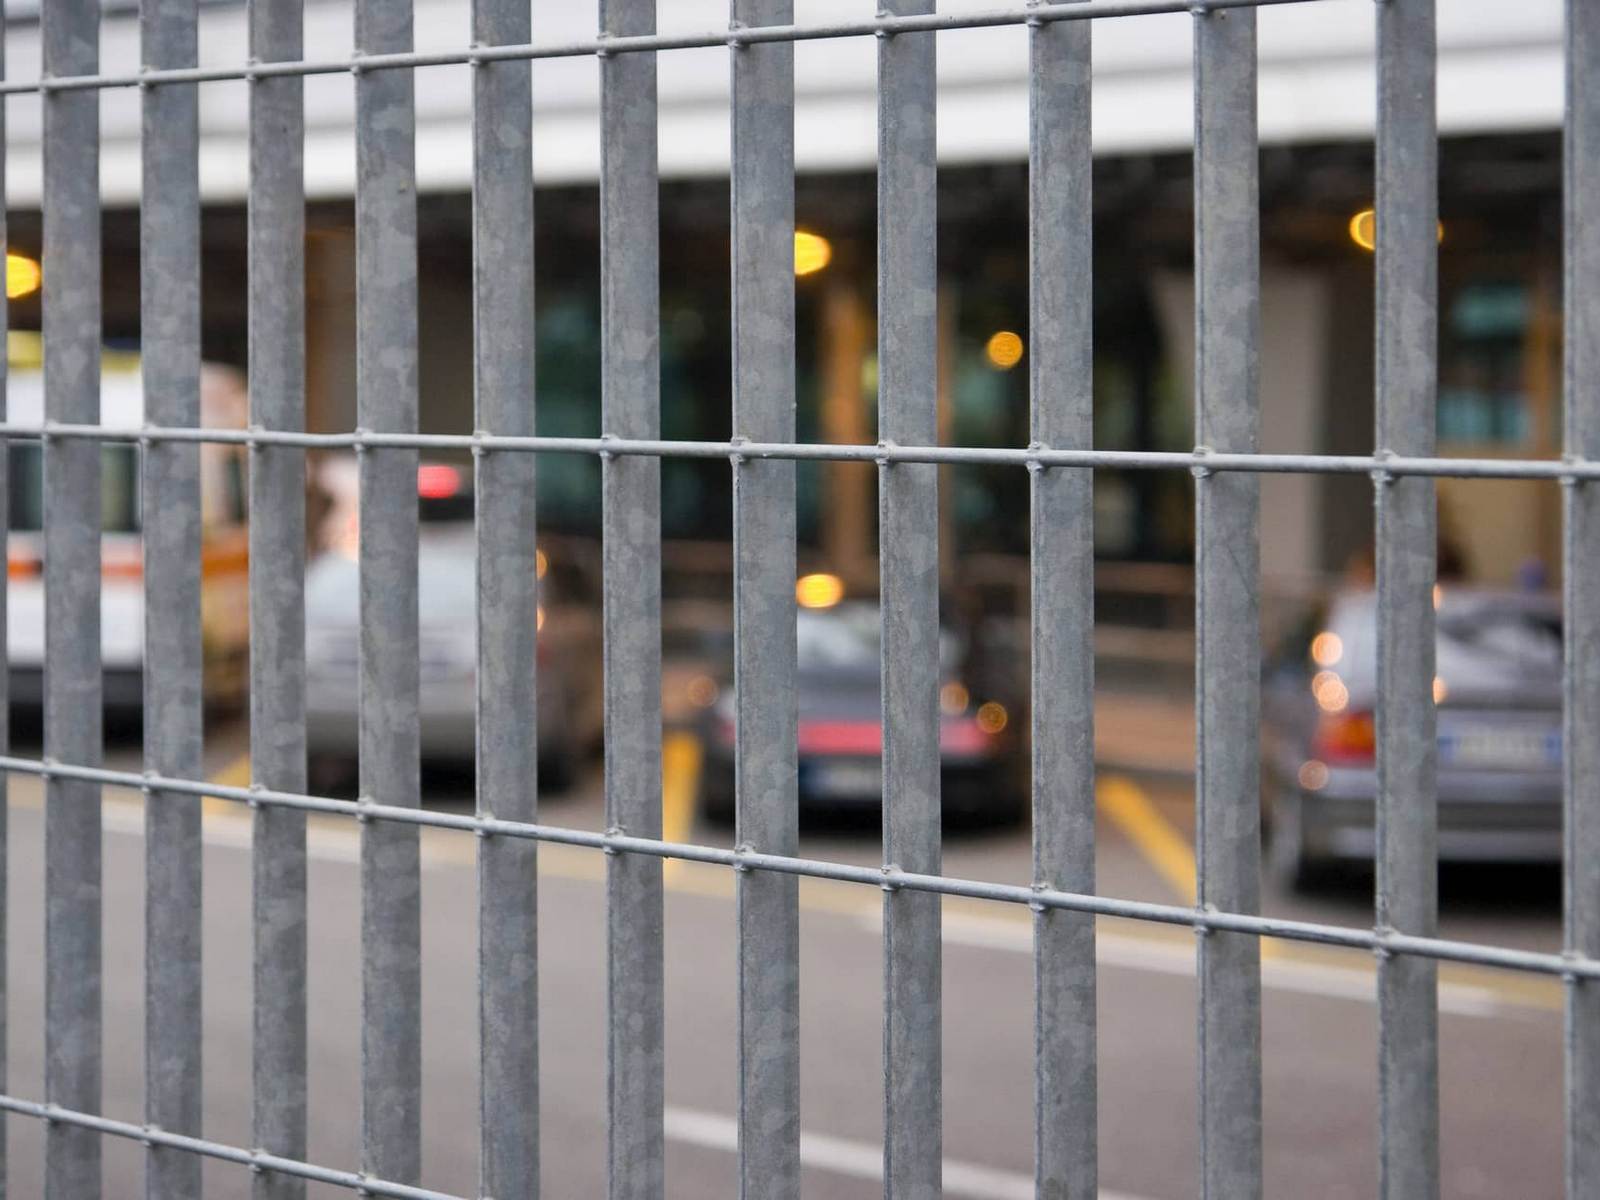 This image shows a close up of an iron security fence on a commercial property.